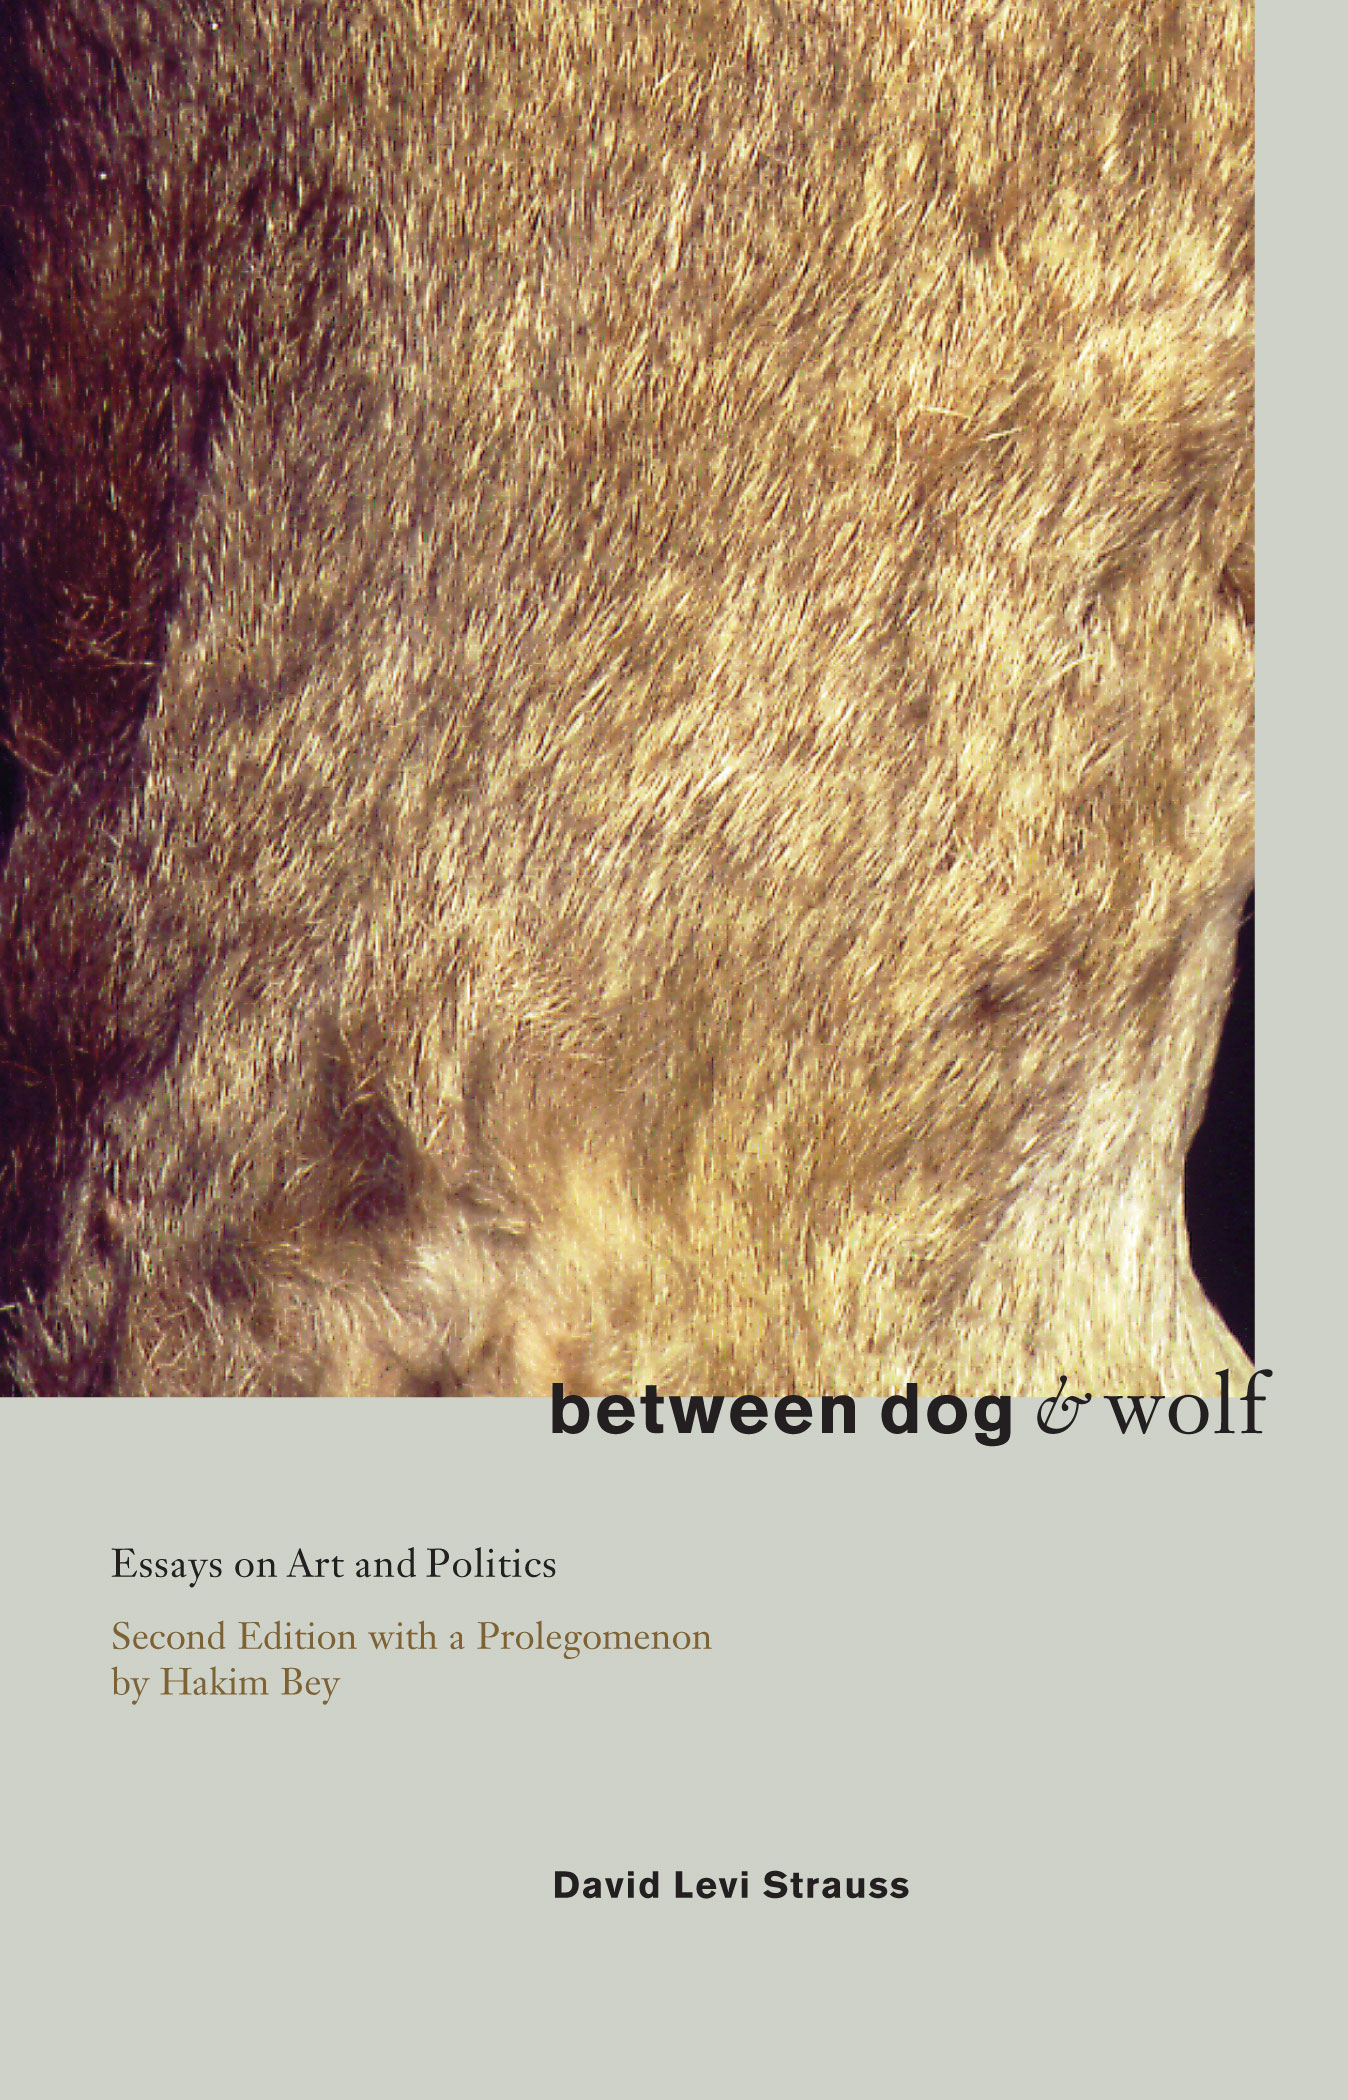 Between Dog and Wolf